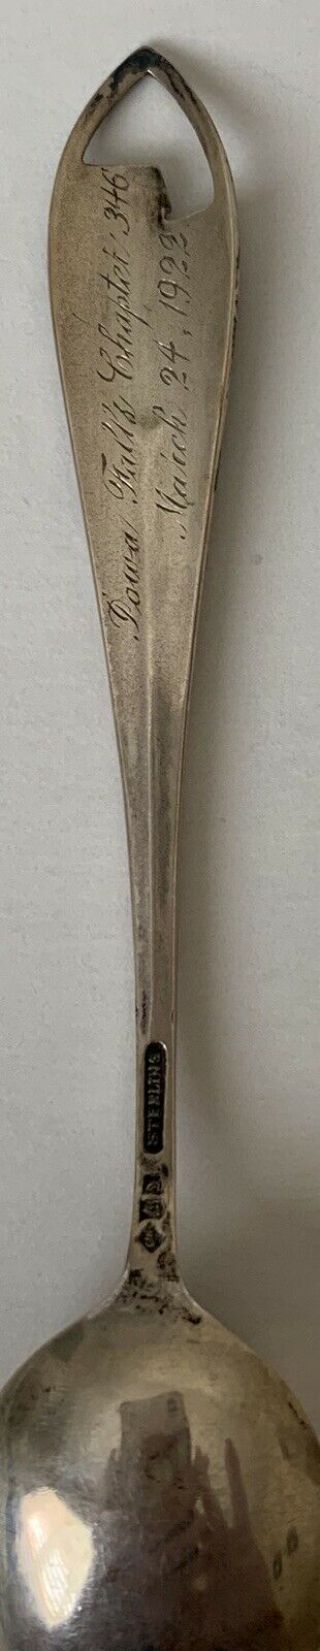 STERLING SILVER SOUVENIR SPOON IOWA FALLS Old Mill And Dam 1922 3